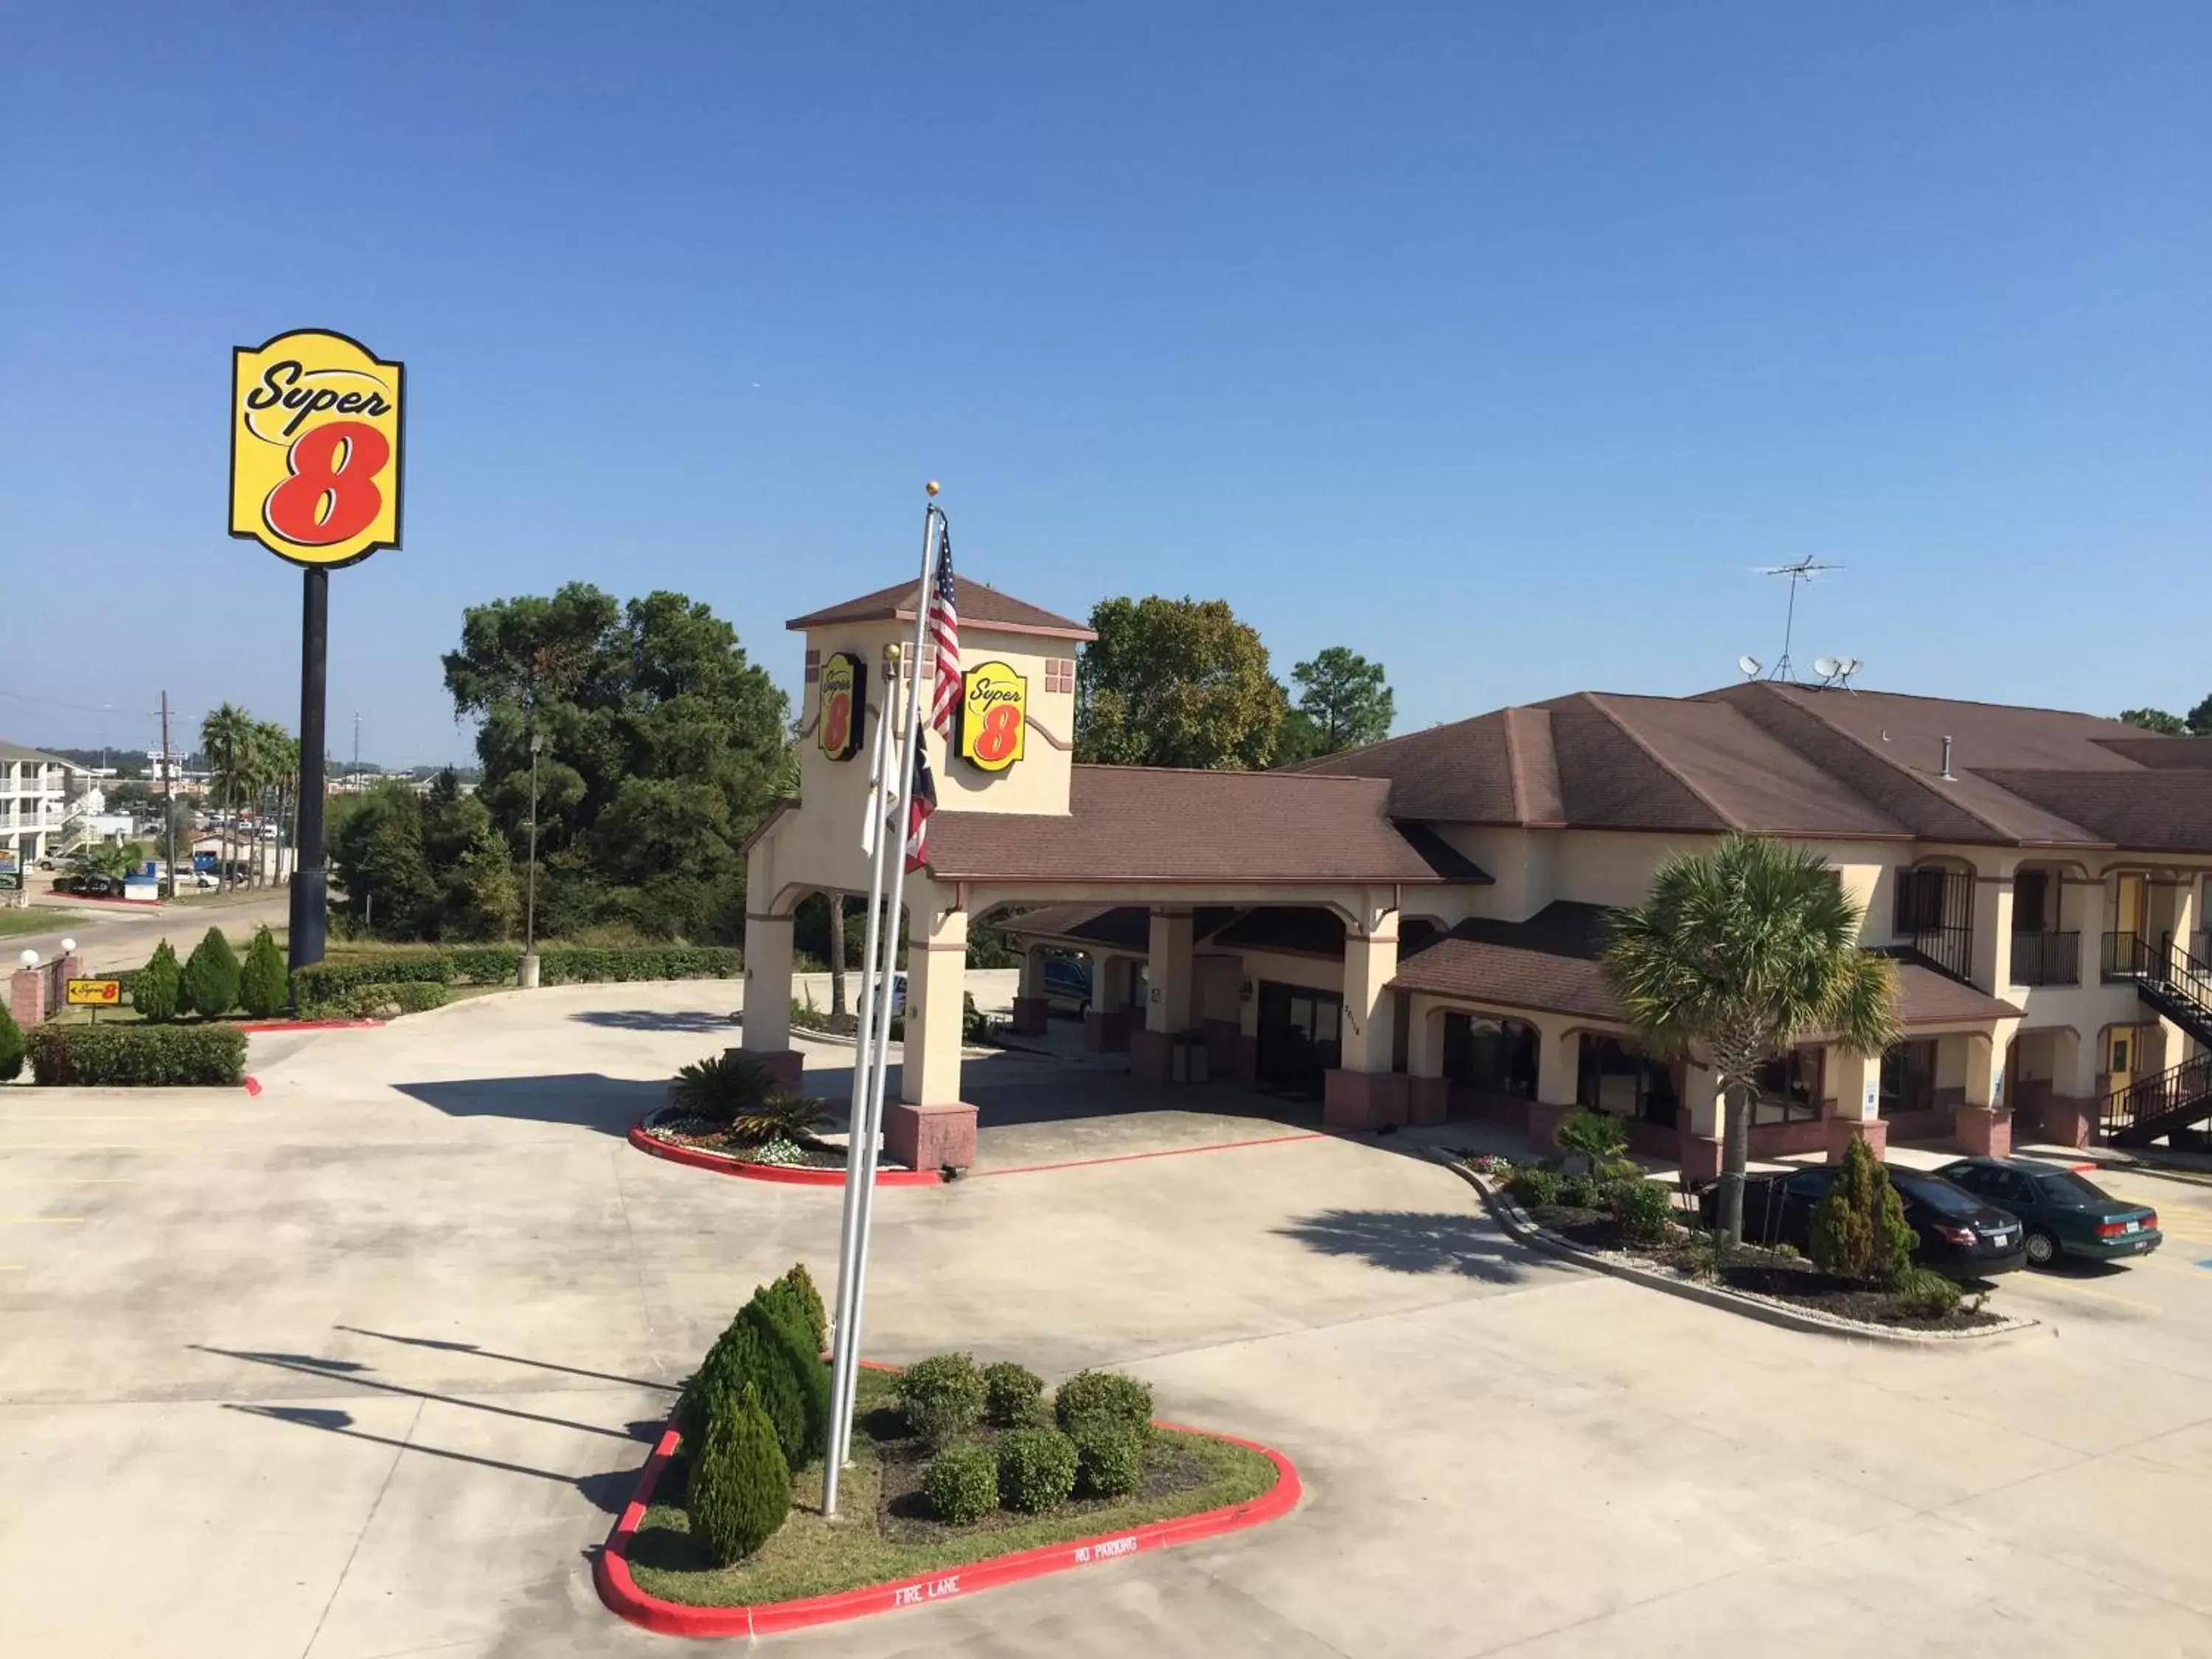 Garden, Property Building in Super 8 by Wyndham Humble - Atascocita - FM 1960 I-69